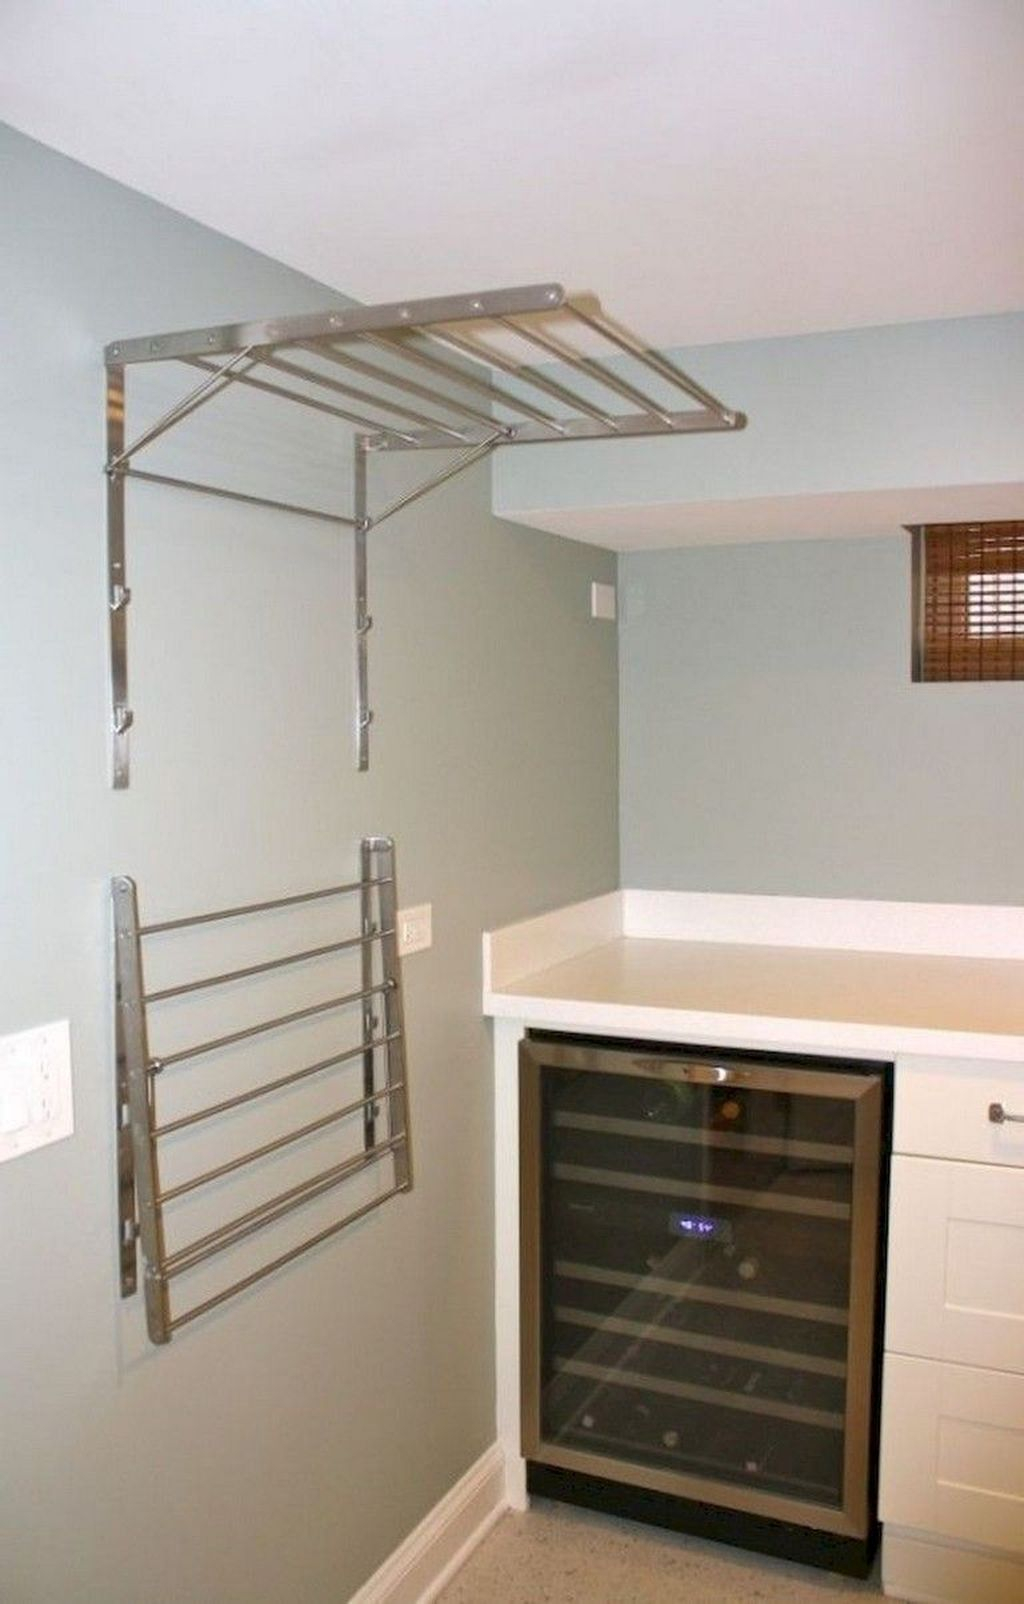 Favored Laundry Room Organization Ideas To Try 02